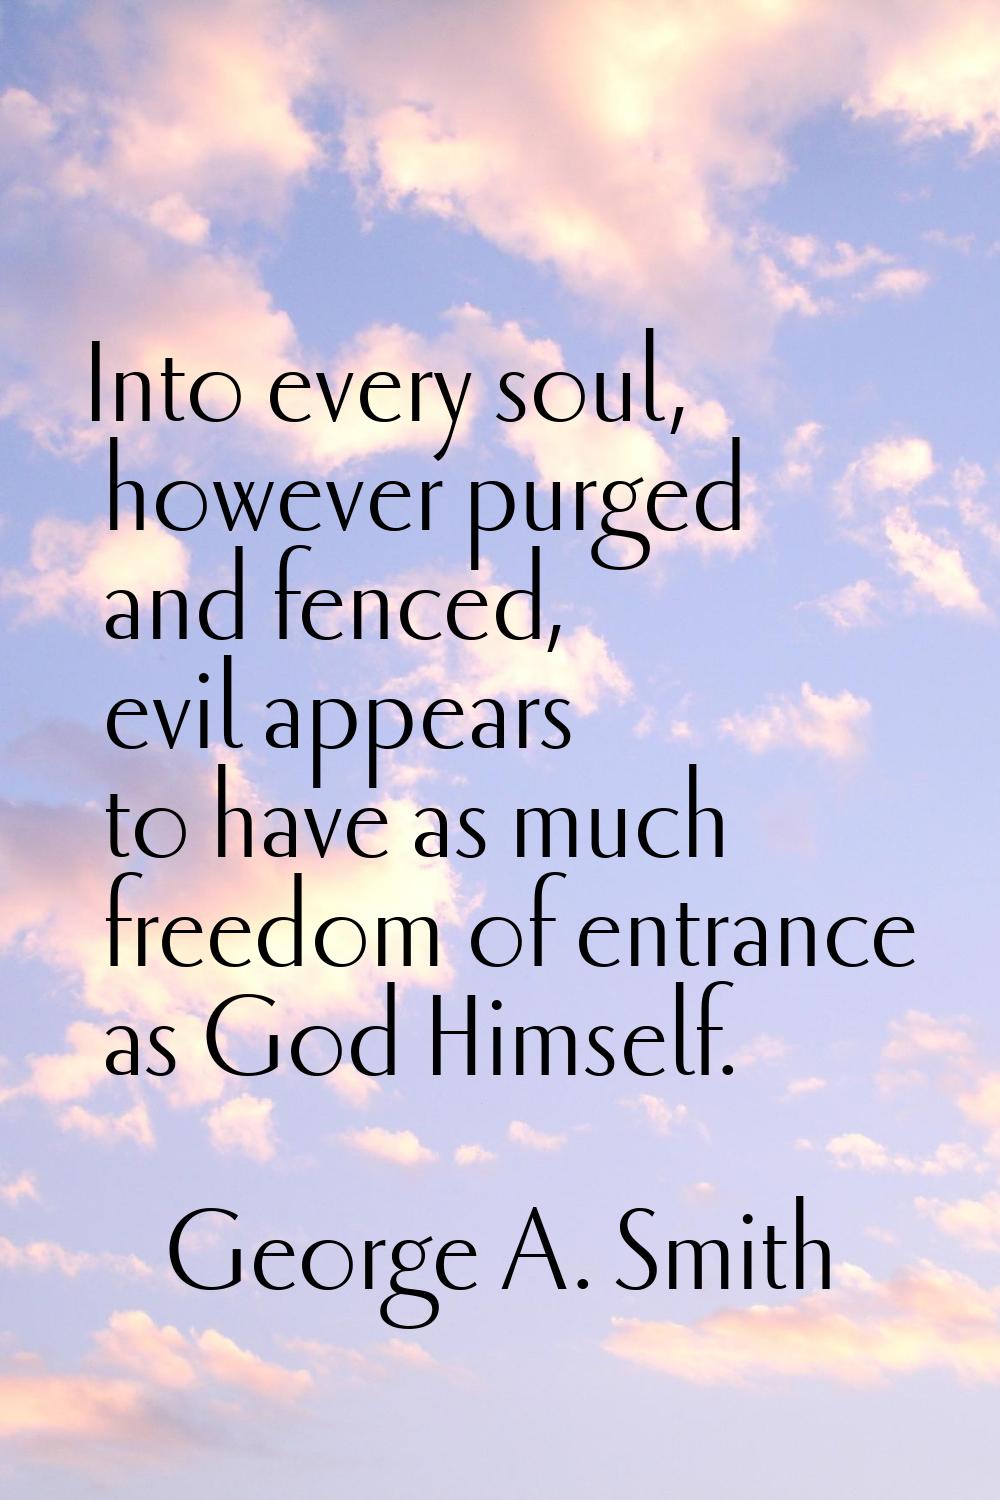 Into every soul, however purged and fenced, evil appears to have as much freedom of entrance as God